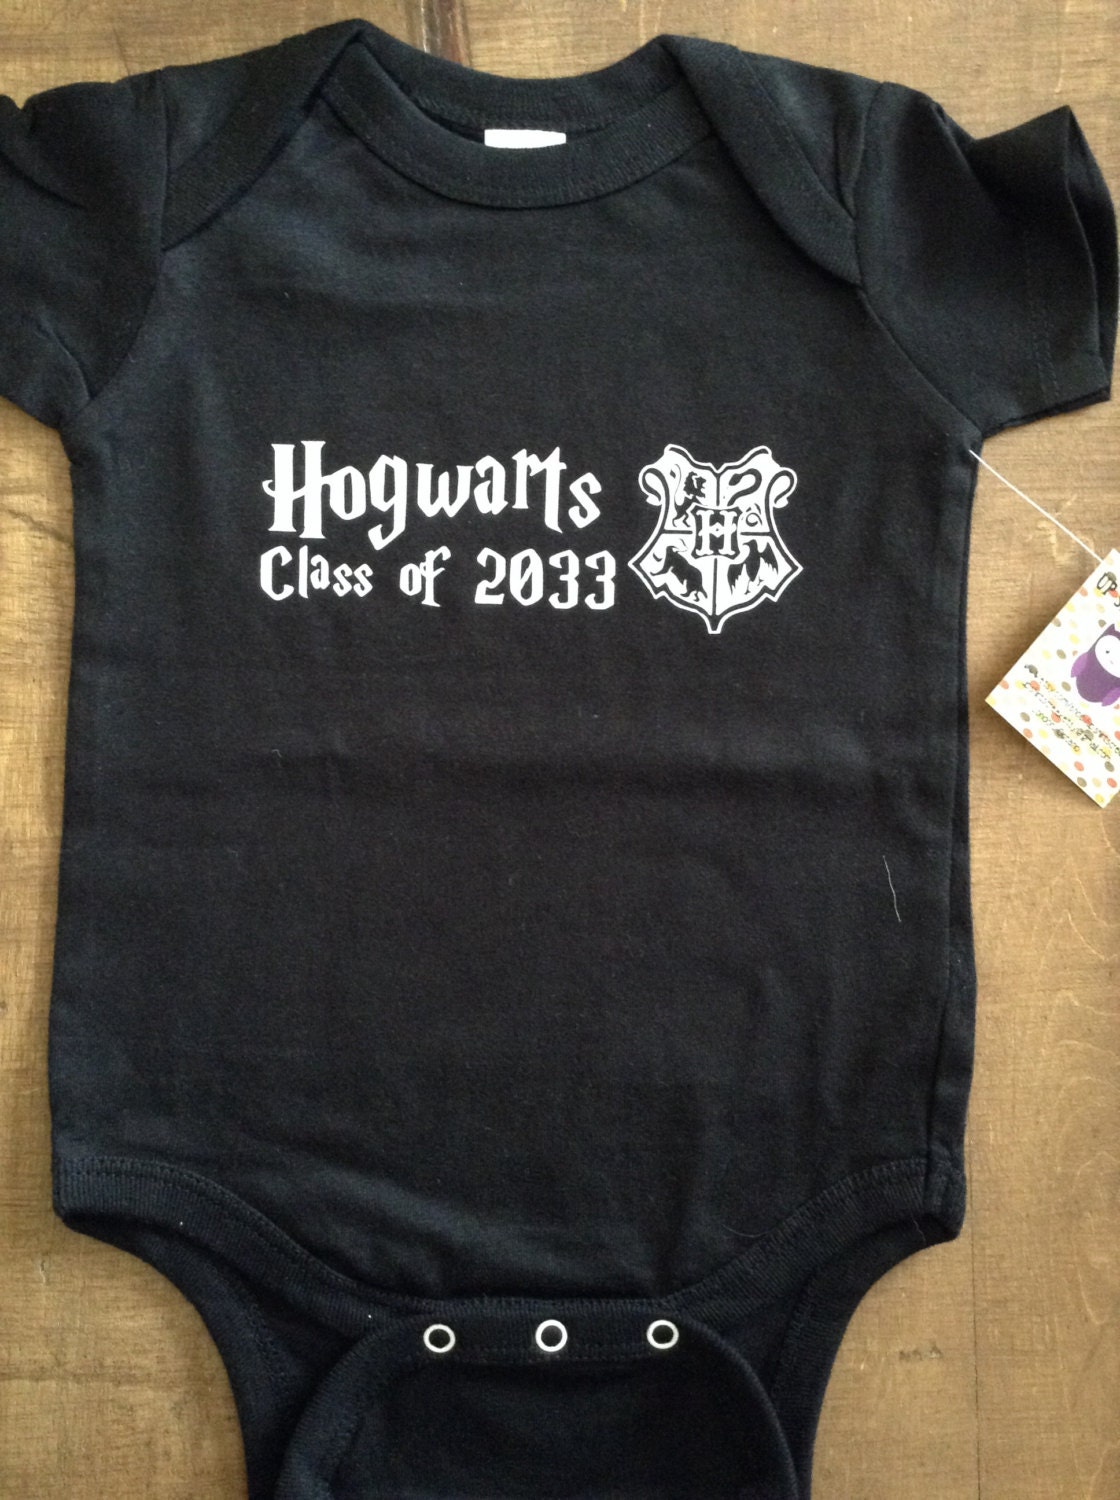 Harry Potter Inspired Hogwarts Class of 2033